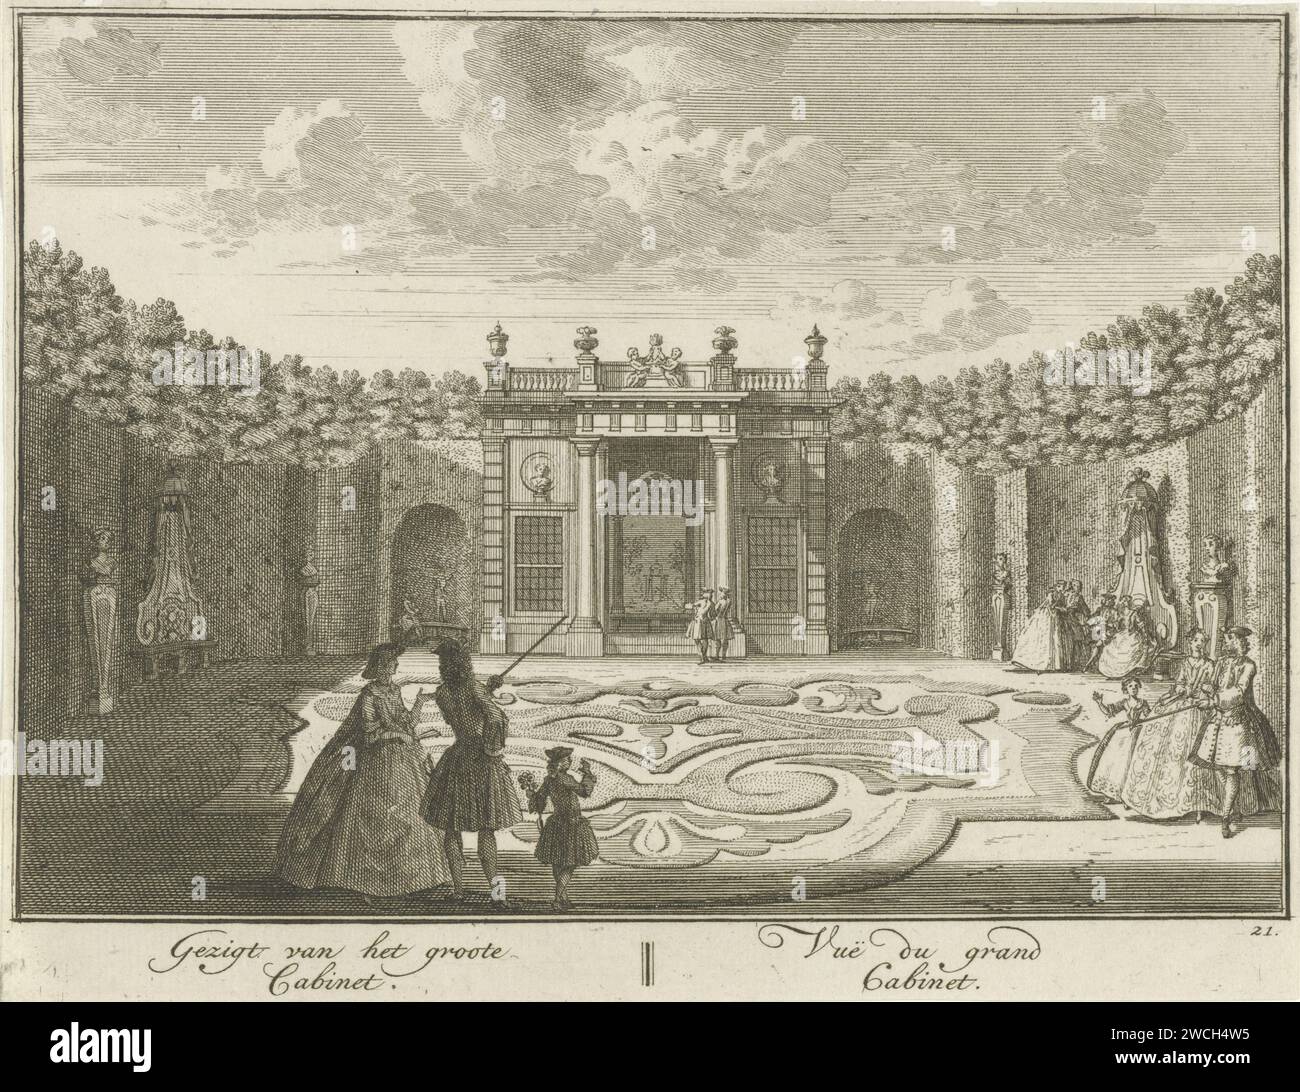 Cabinet in the garden of Huis ter Meer in Maarssen, Hendrik de Leth, c. 1740 print View of the cabinet in the French garden of Huis ter Meer. Groups of figures walk in the garden. The print is part of a series with 26 faces at Huis ter Meer and the accompanying estate in Maarssen.  paper etching country-house. French or architectonic garden; formal garden House Ter Meer Stock Photo